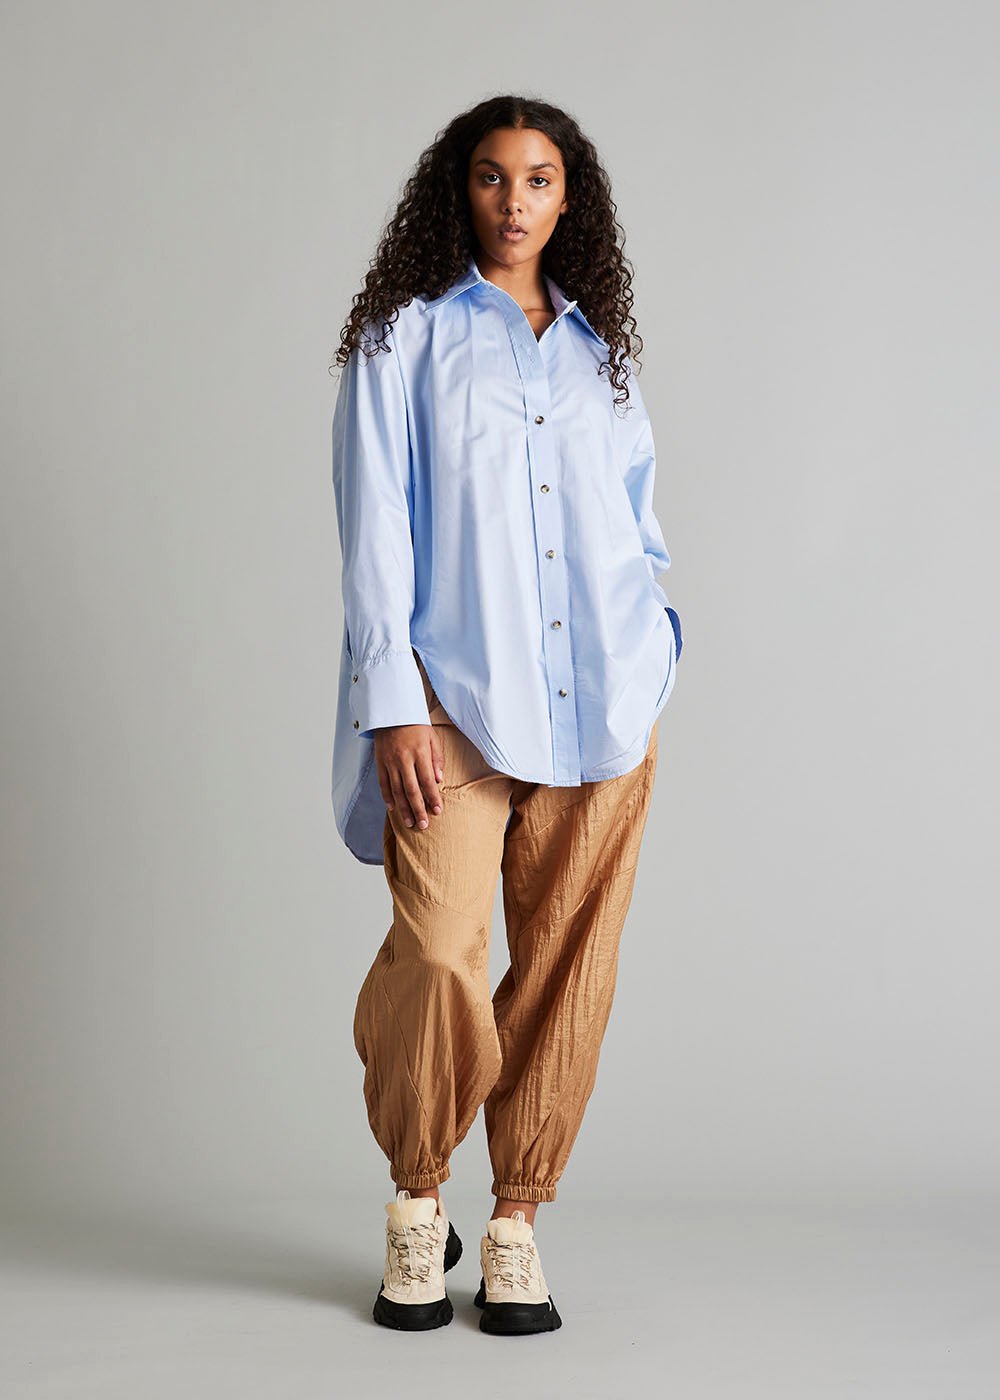 Milford Oversized Shirt in Sky by LAU